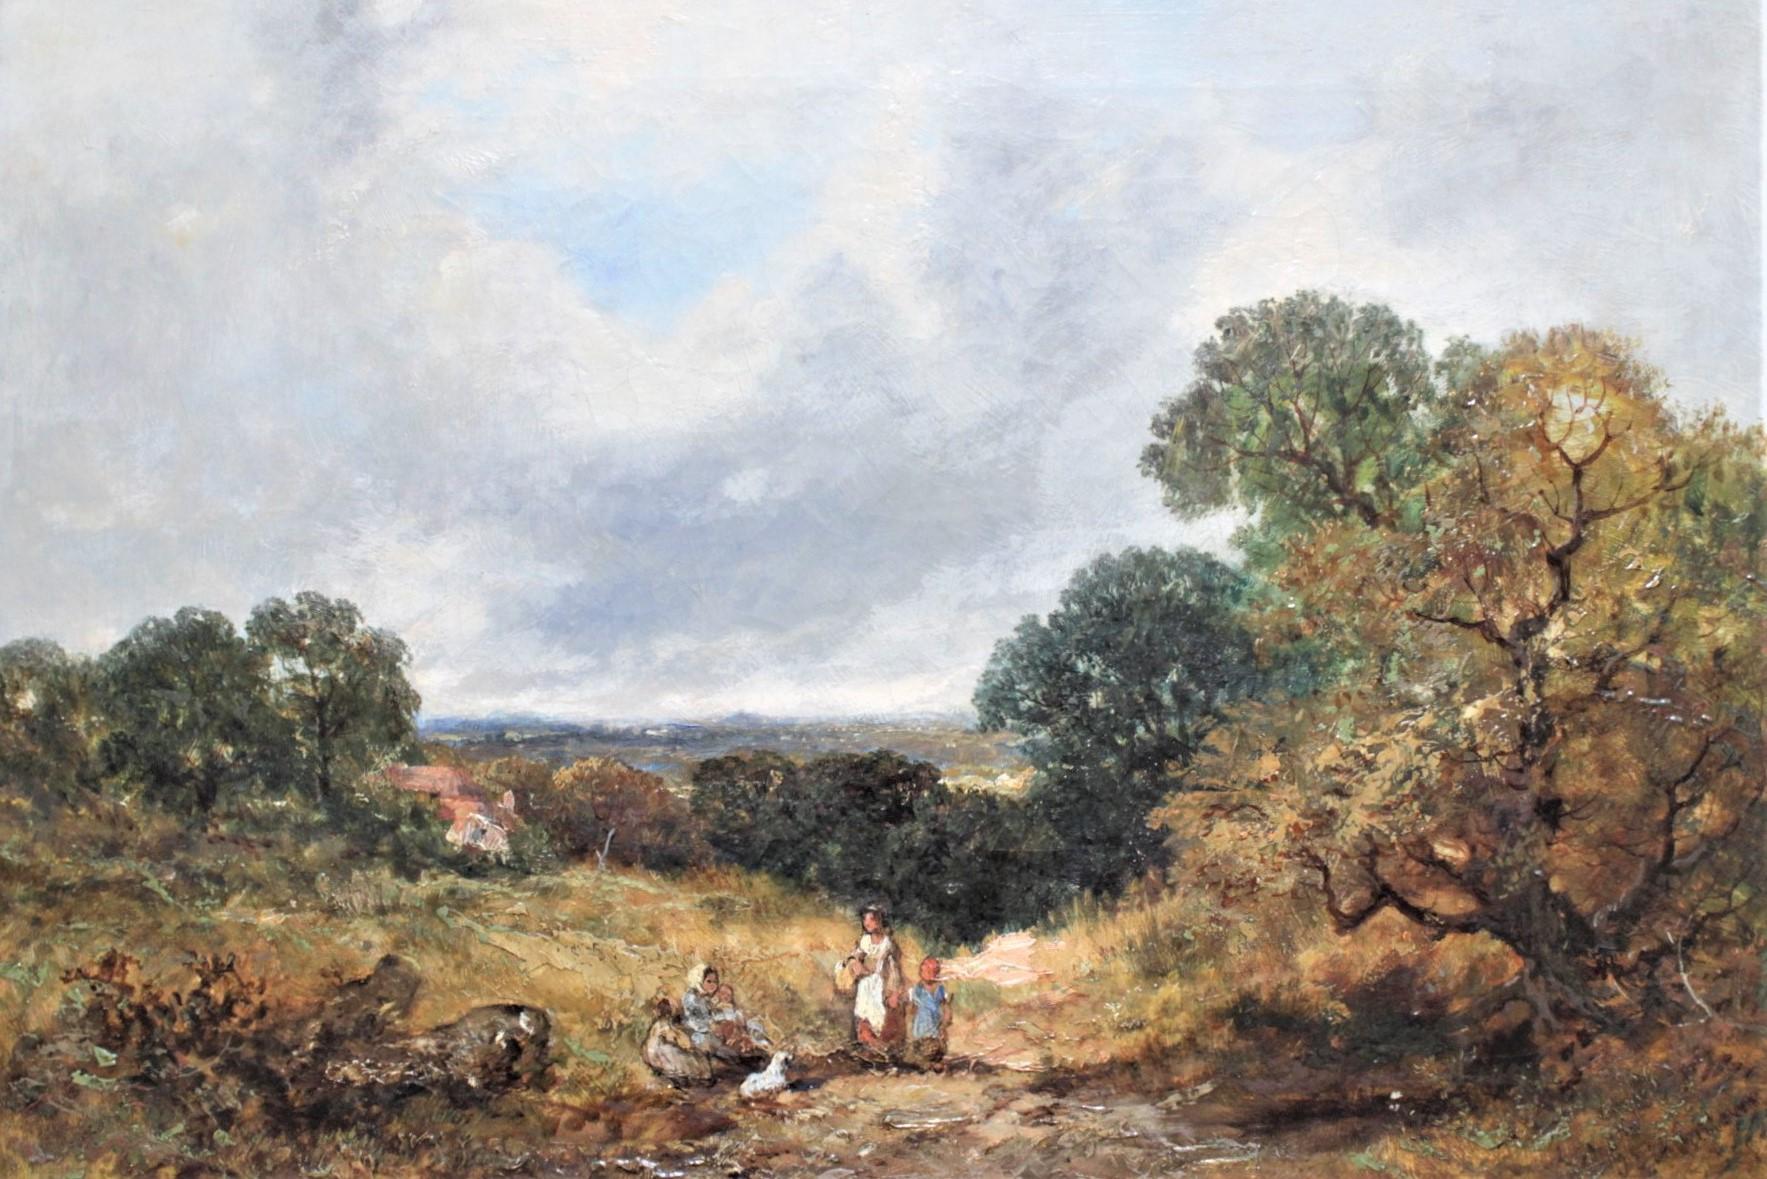 This antique original oil painting on canvas was done by James Edwin Meadows, a known British artist, in approximately 1860 in the period Victorian style. The painting depicts an English countryside with a mother and children in the foreground. The